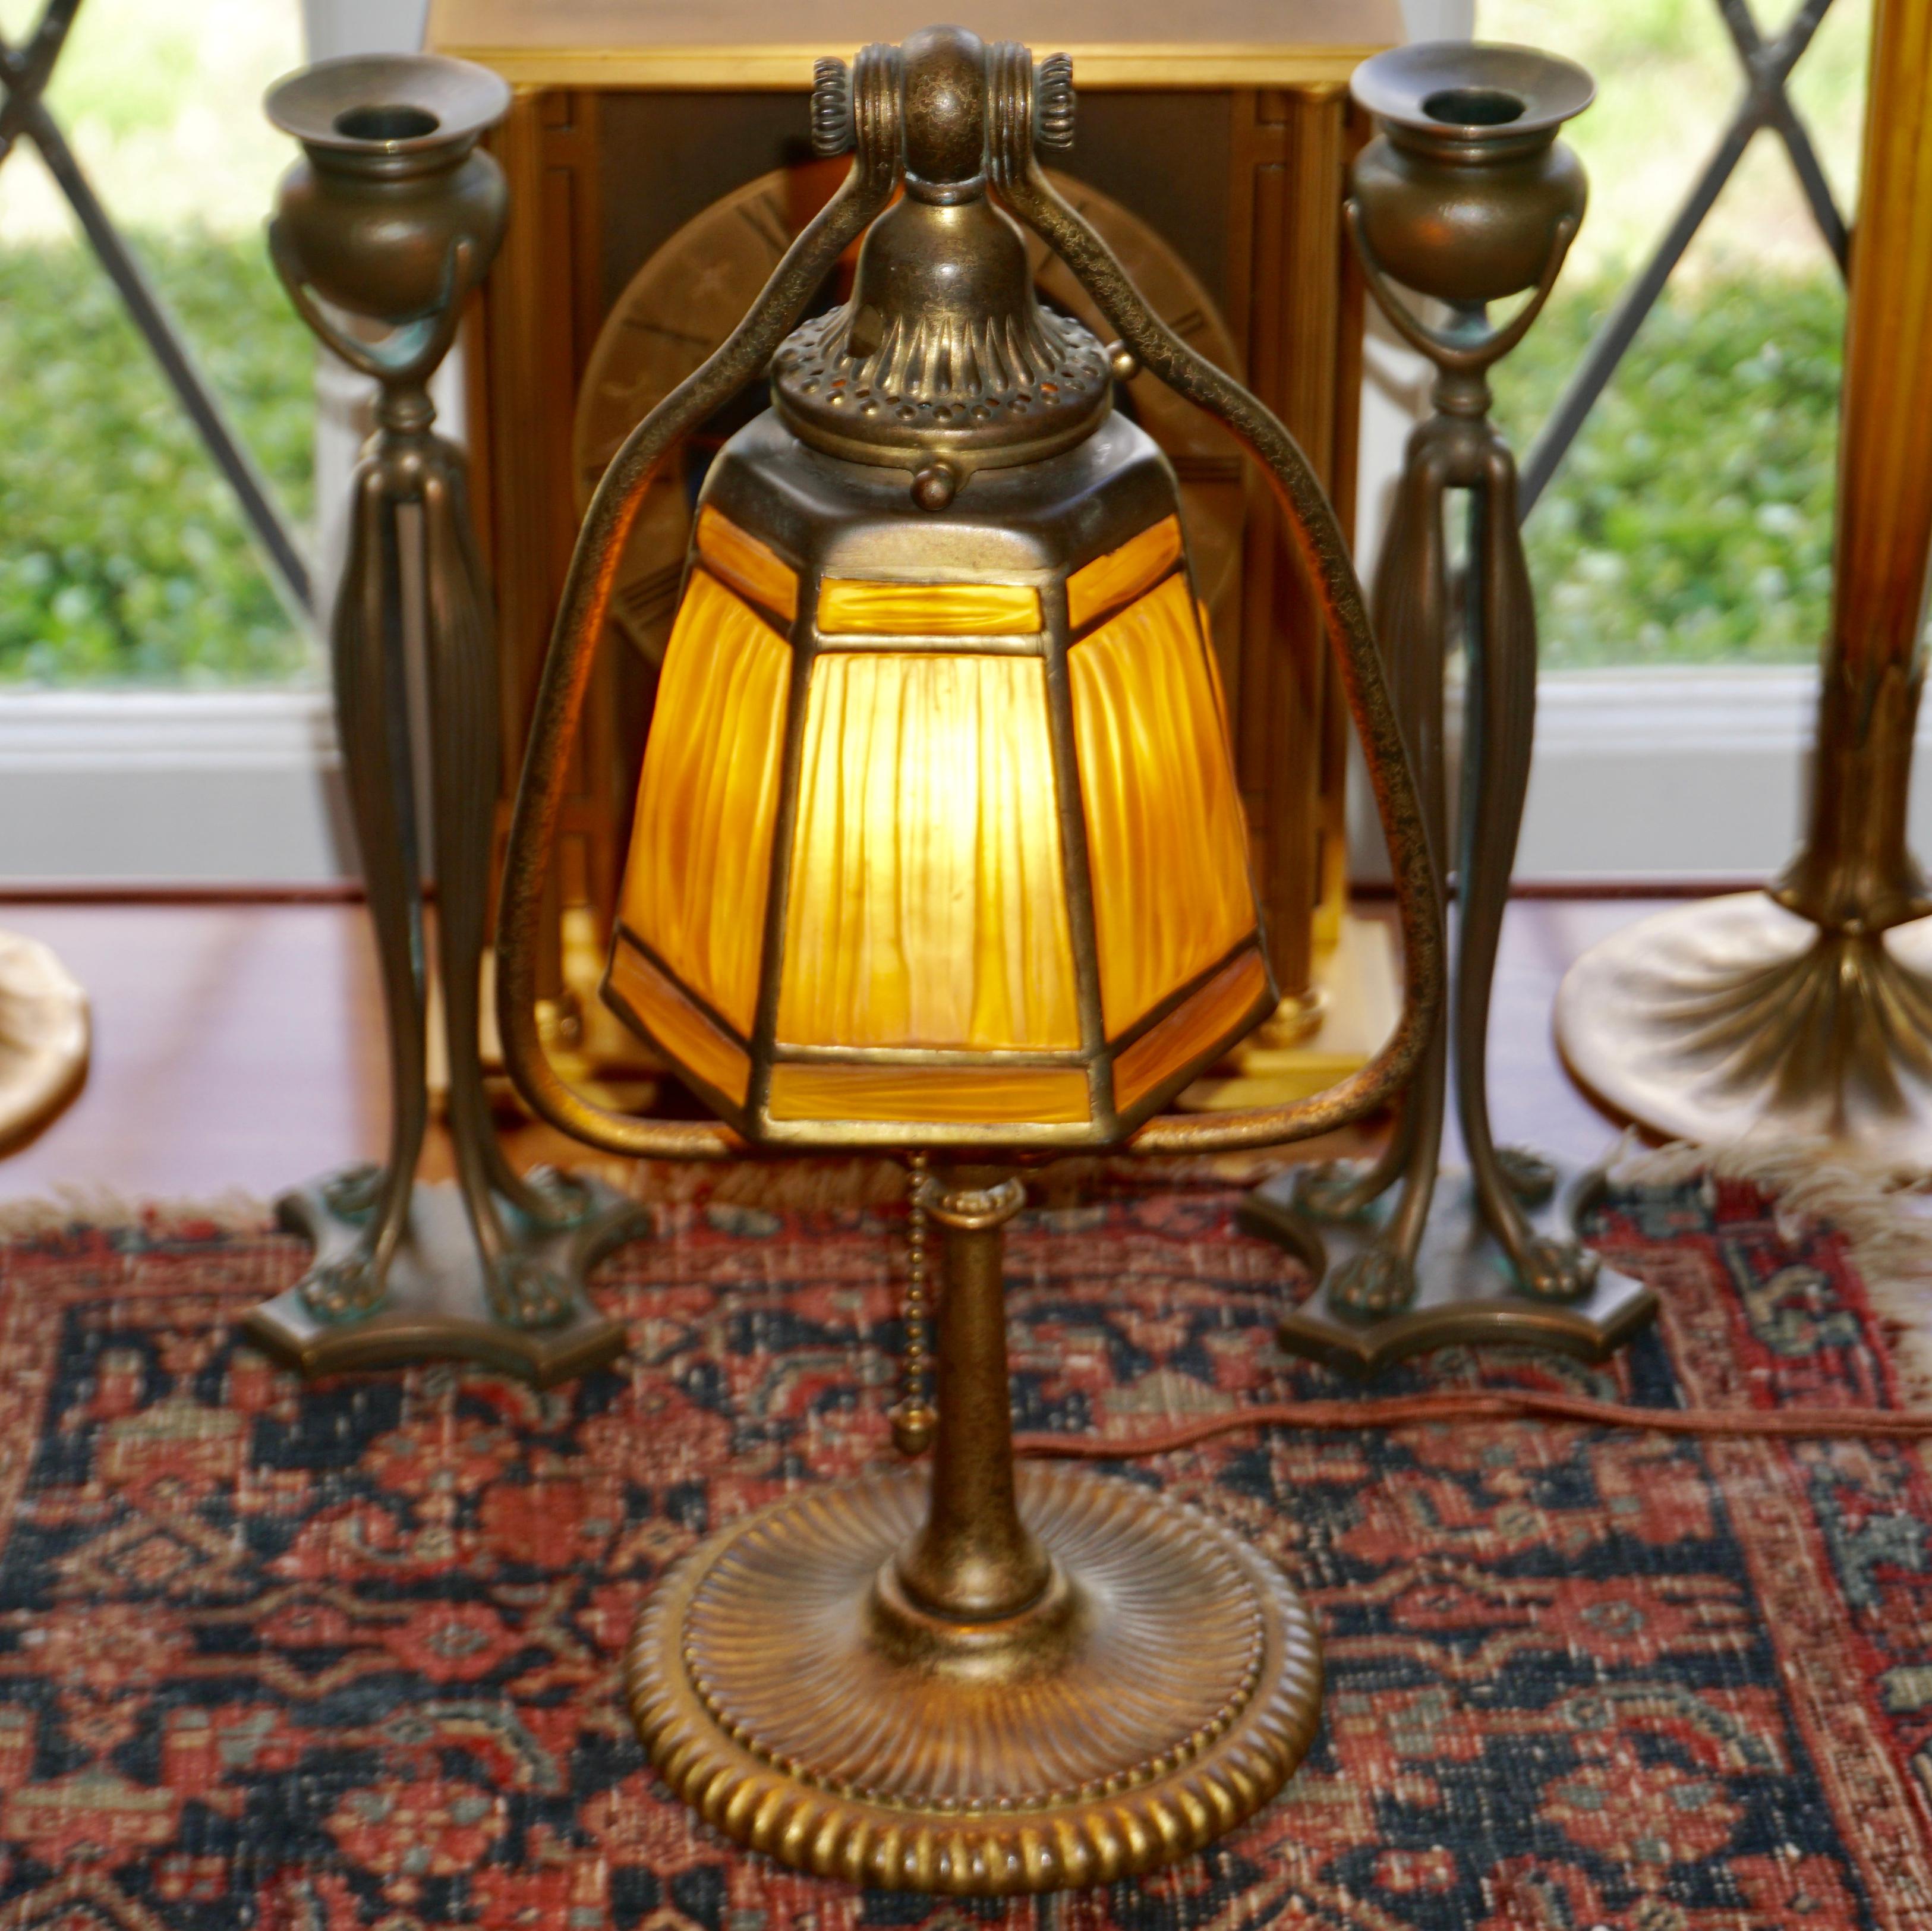 Tiffany Studios Linenfold Lamp, circa 1914
This is the perfect size and fully functional Tiffany Studios lamp perfect for your bedside table, desk or library table. The gold gilt patina on the orange peal textured bronze has a beautiful aged look.